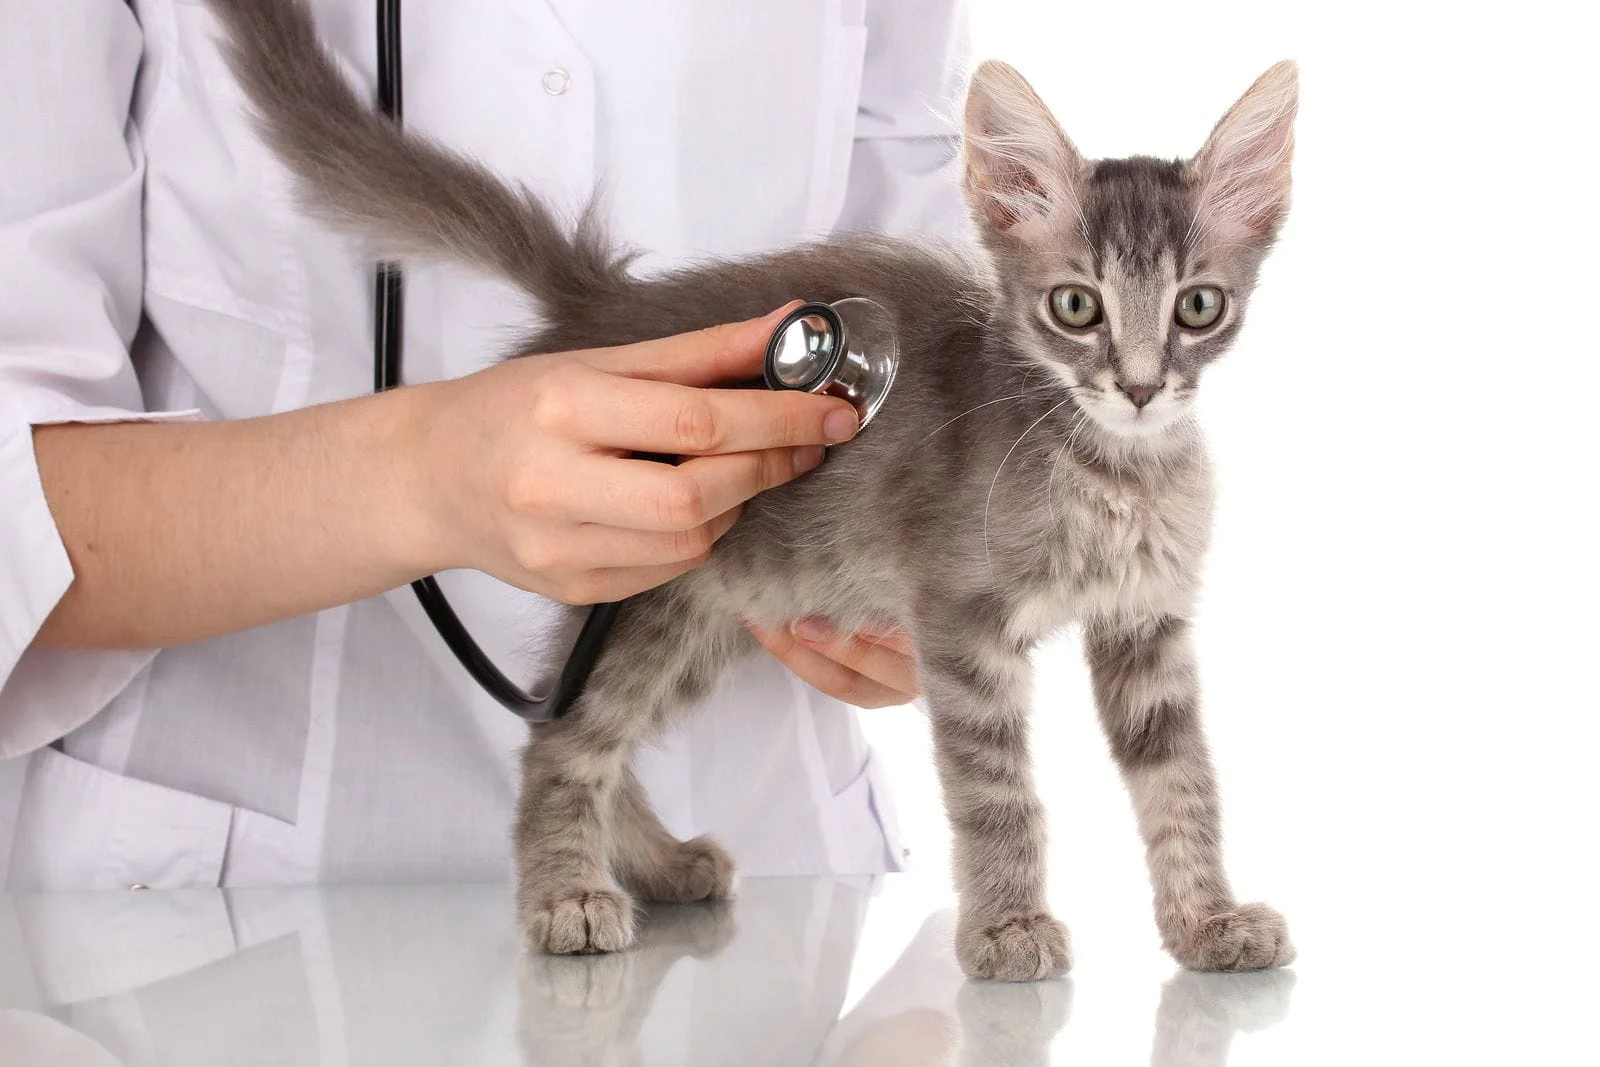 Providing Urgent Veterinary Care: A Lifeline for Pets in Need